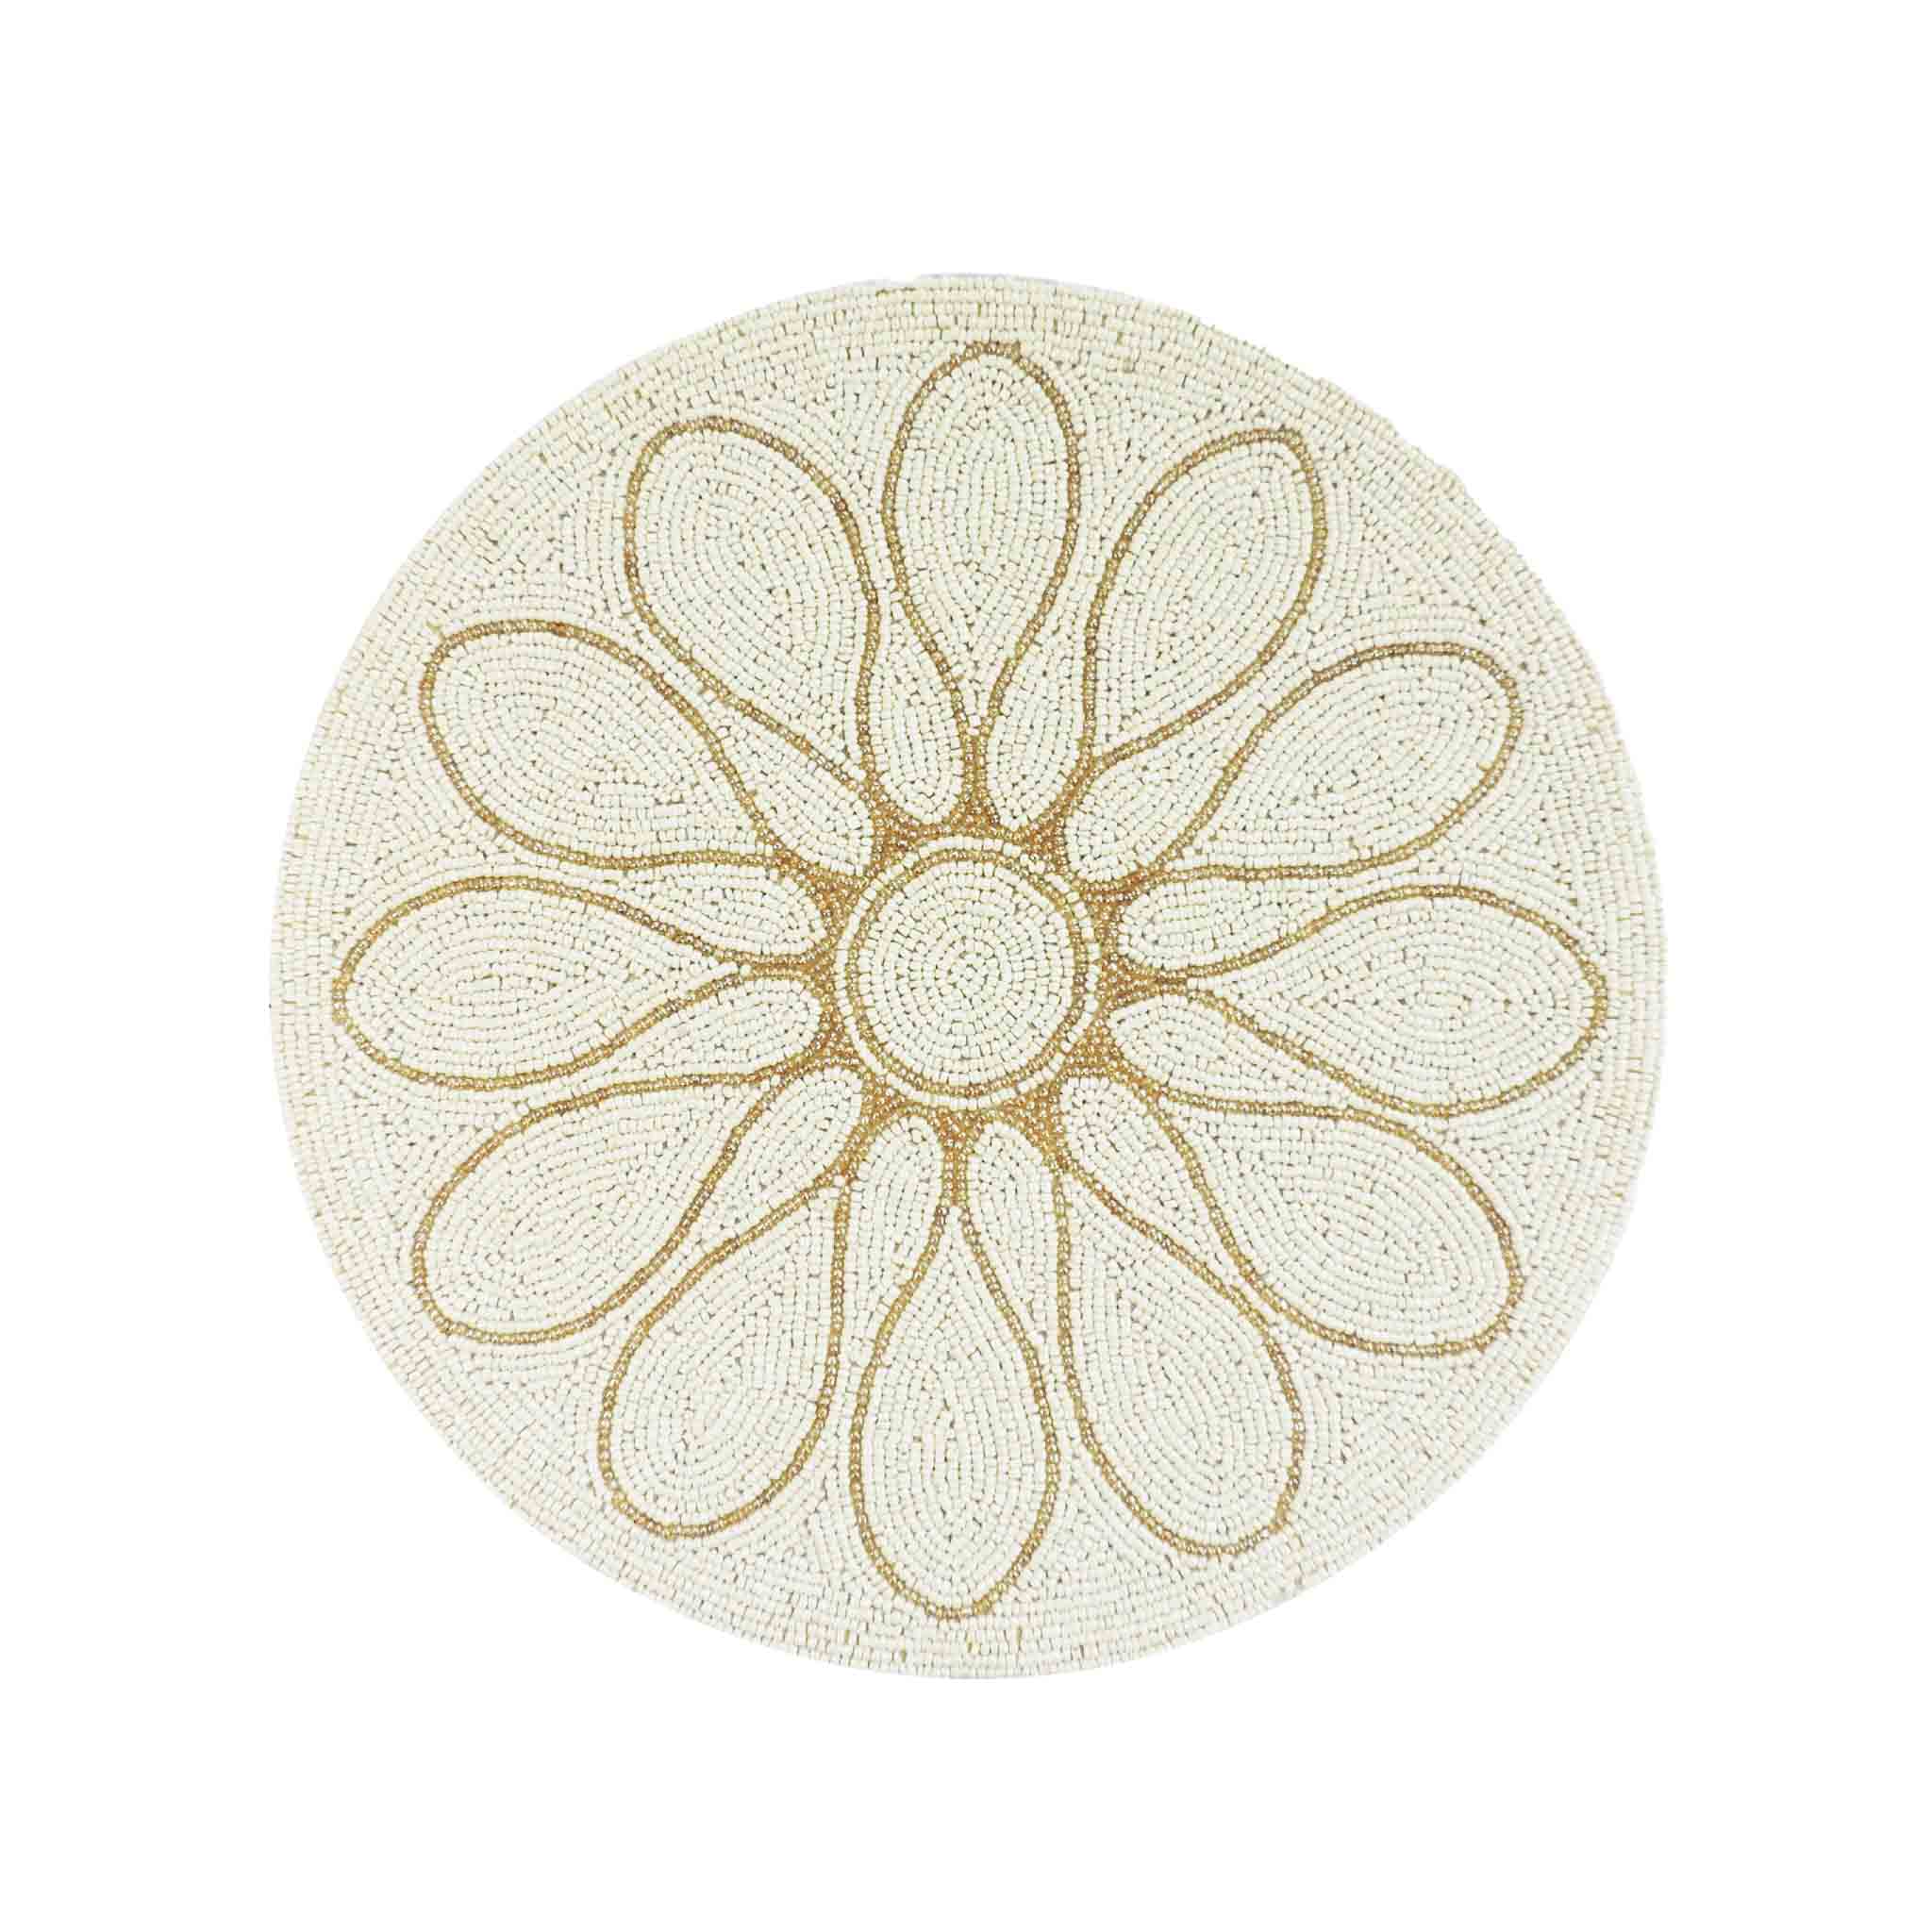 Petal Impressions Bead Embroidered Placemat in Cream, Set of 2